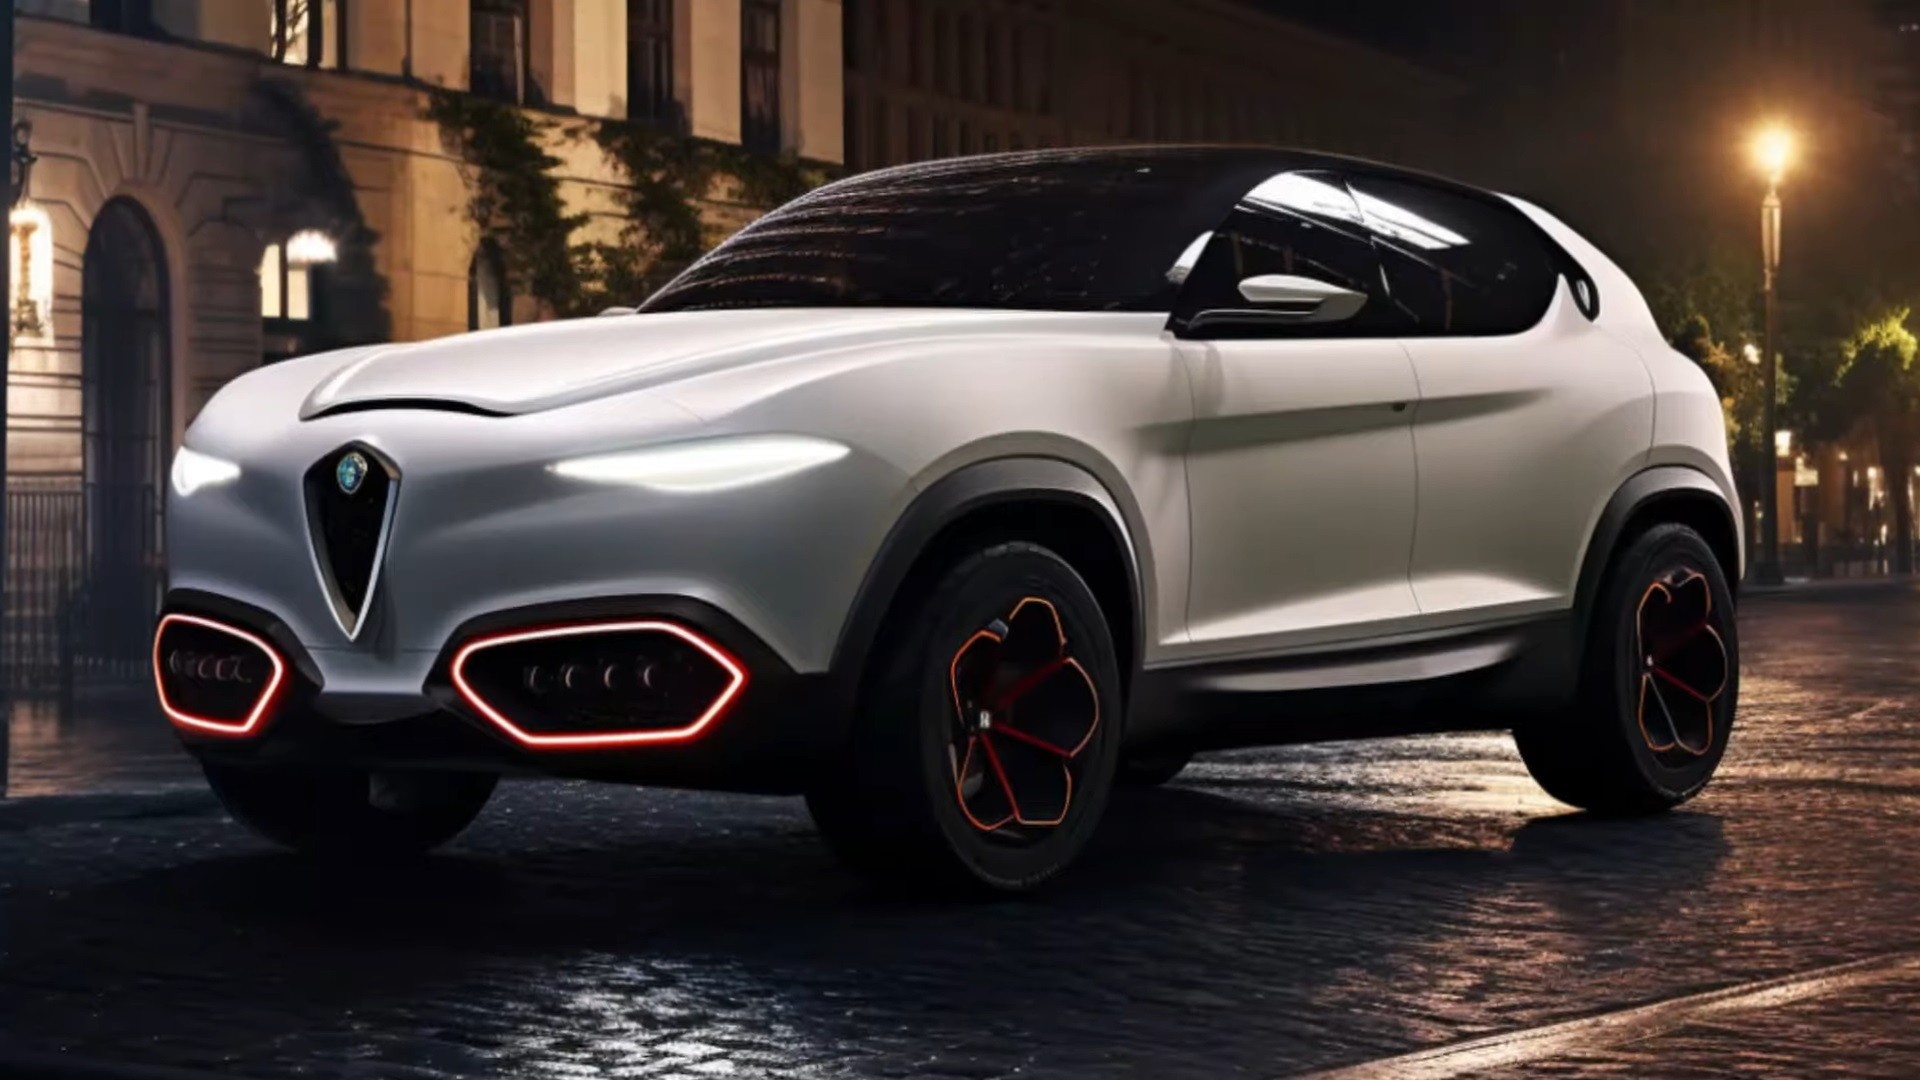 Alfa Romeo Milano: Everything We Know About the New Small SUV That's ...